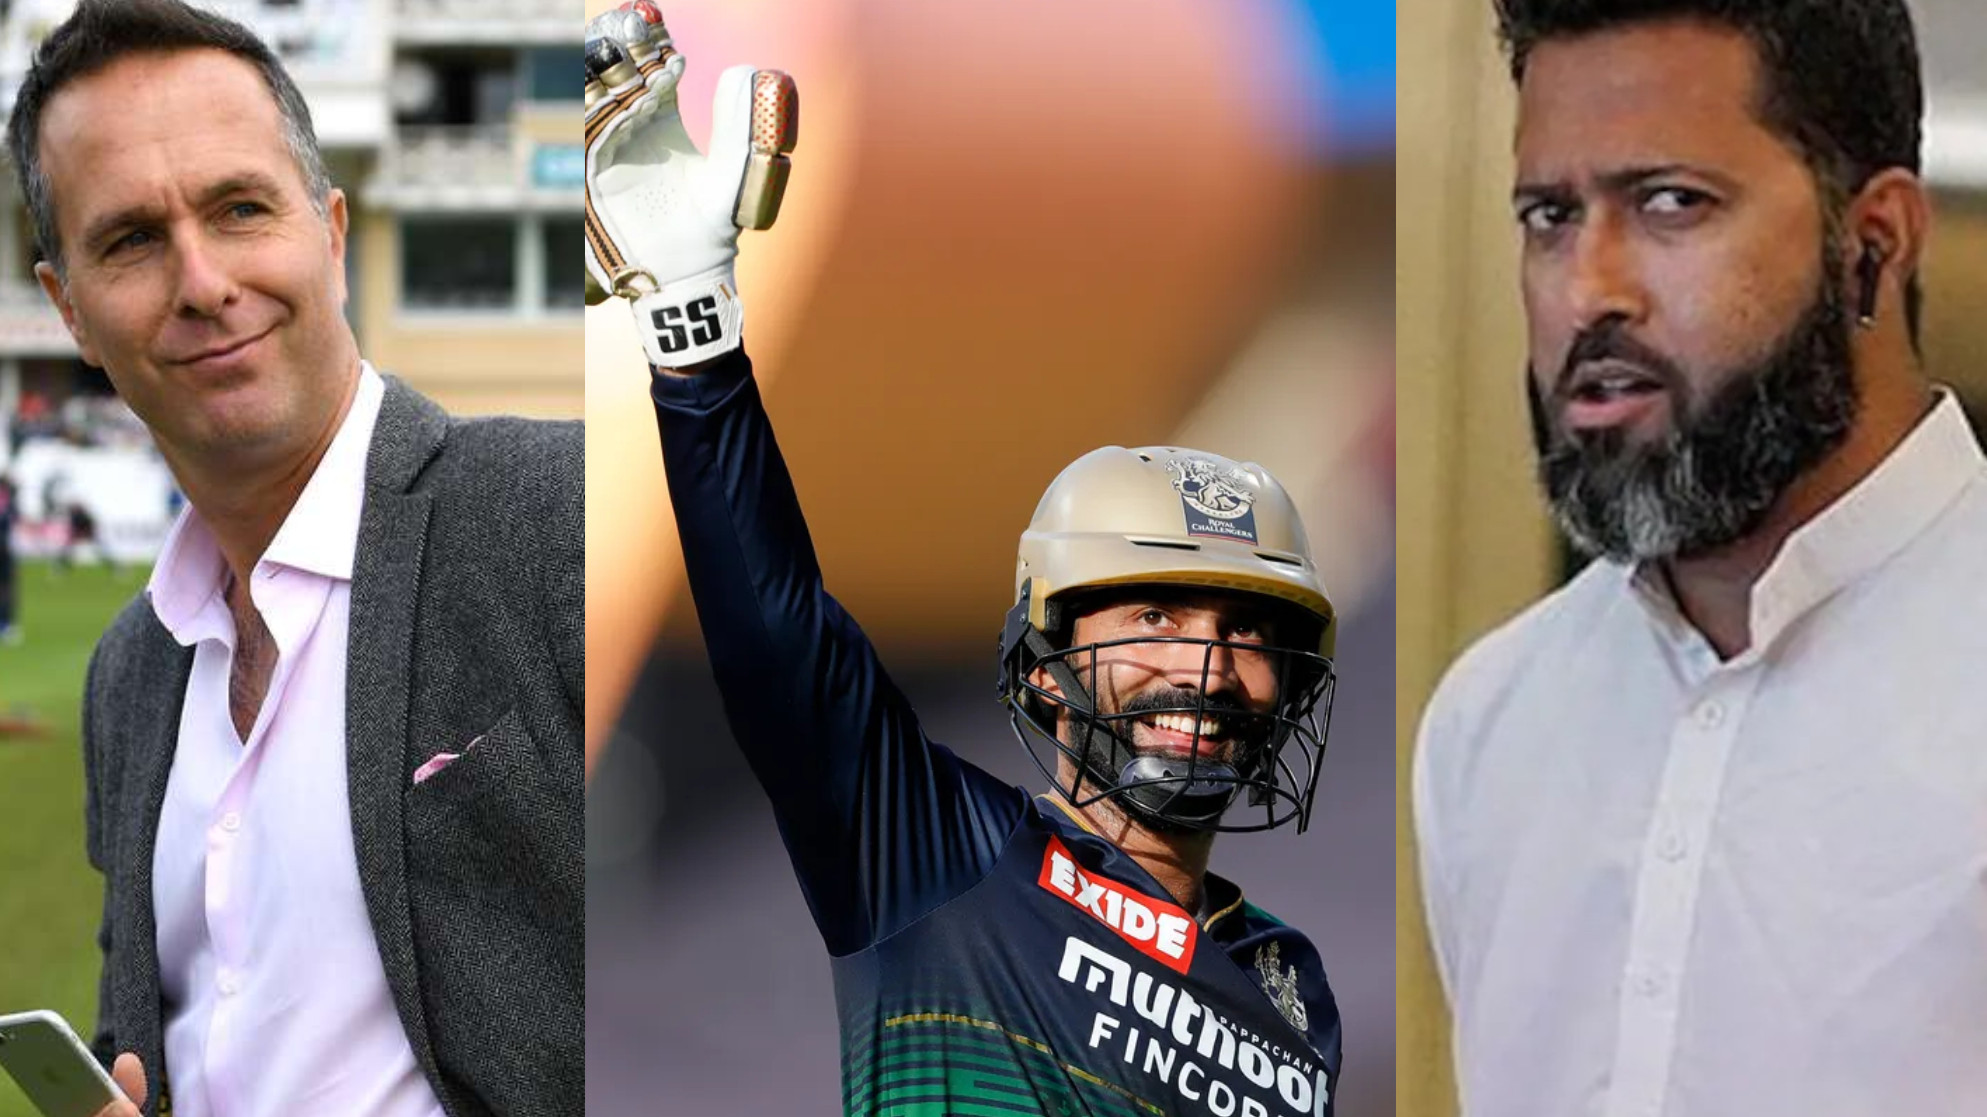 IPL 2022: He has to be in India T20 WC team- Cricket fraternity stunned as Dinesh Karthik makes 30* in 8 balls